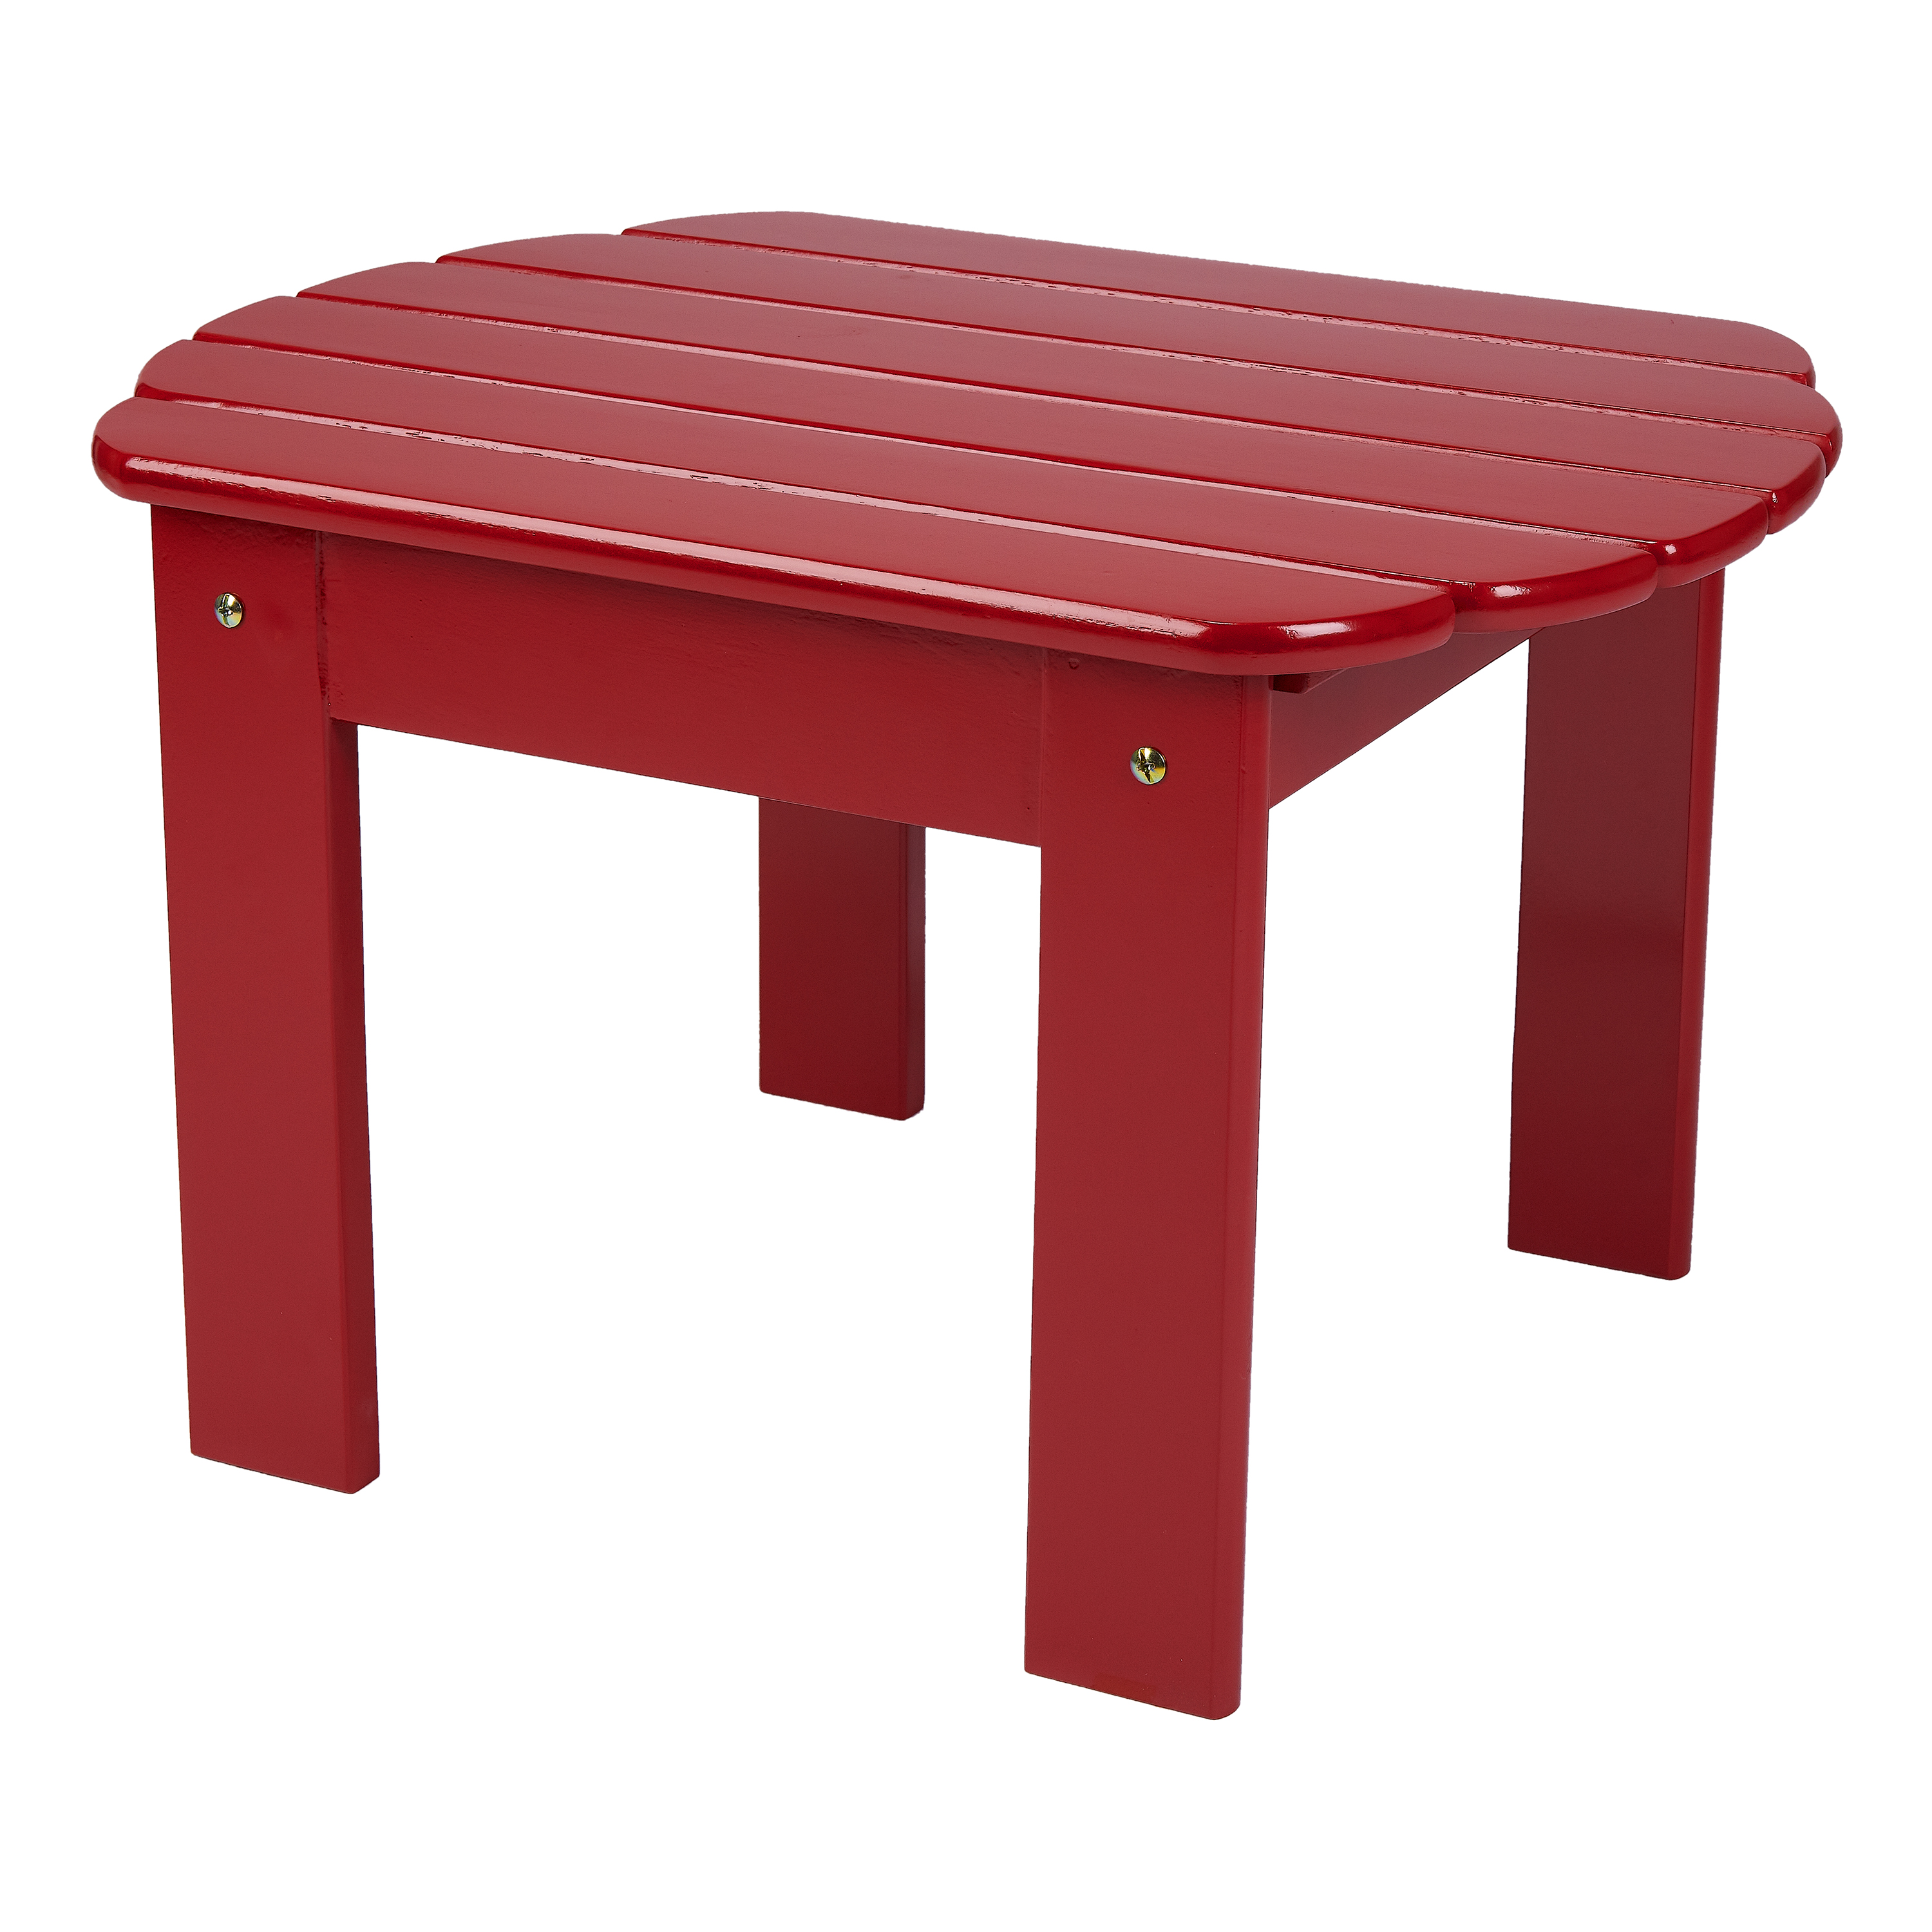 Mainstays Wood Adirondack Outdoor Side Table, Red - image 1 of 6